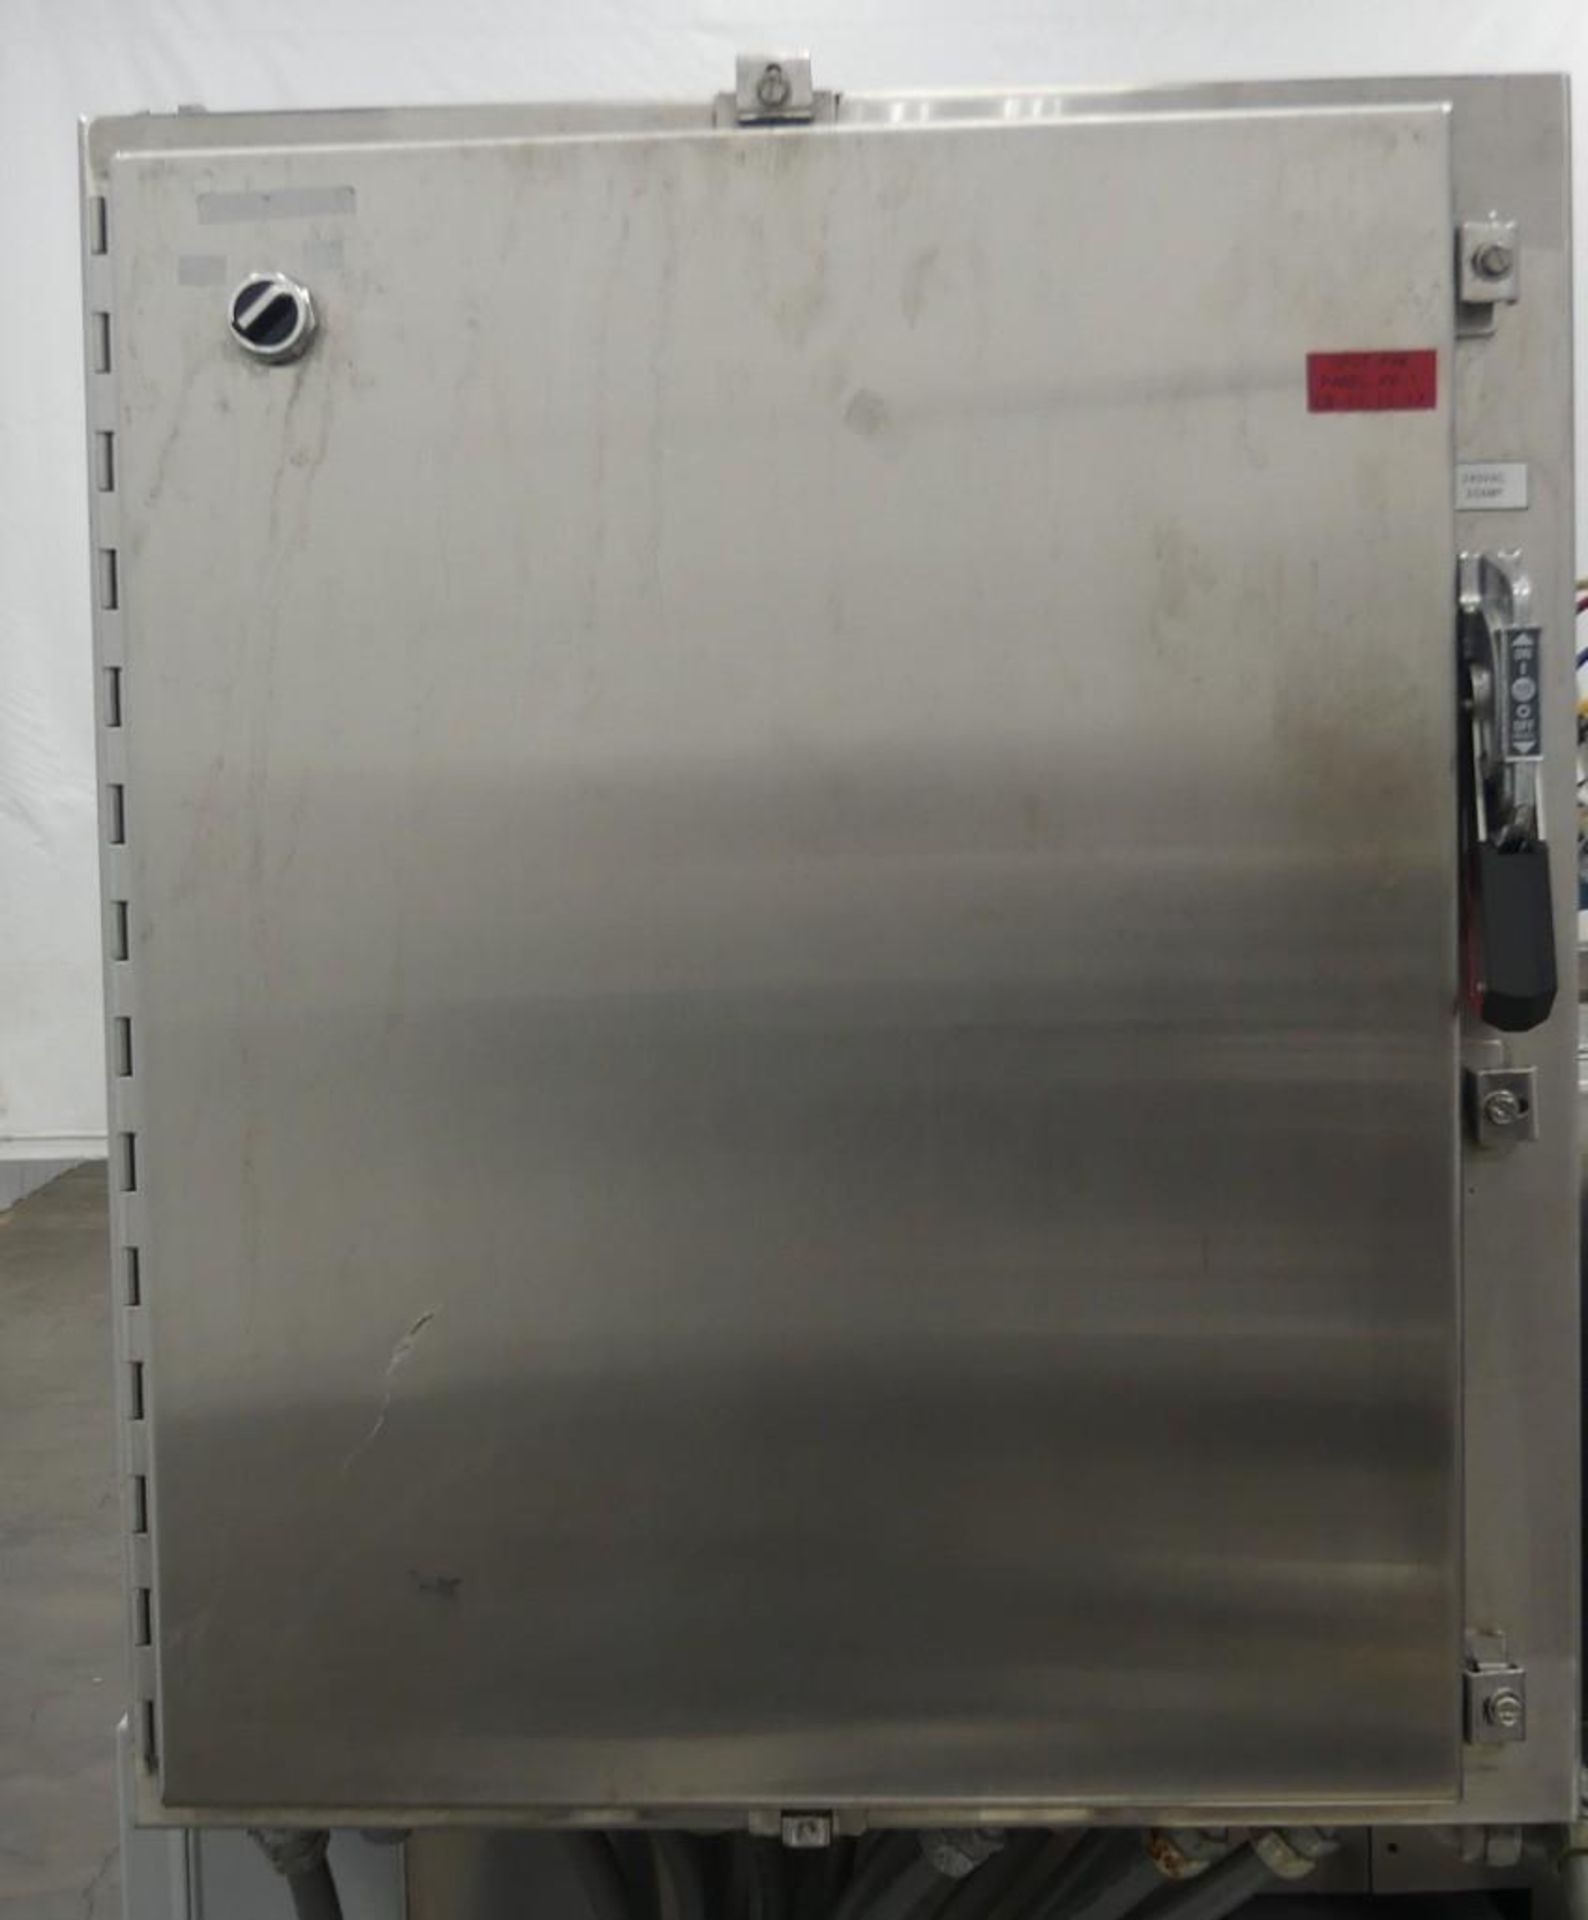 Arpac Delkor Spot-Pak 112-SS-24 Automatic Stainless Steel Shrink Bundler - Image 70 of 101